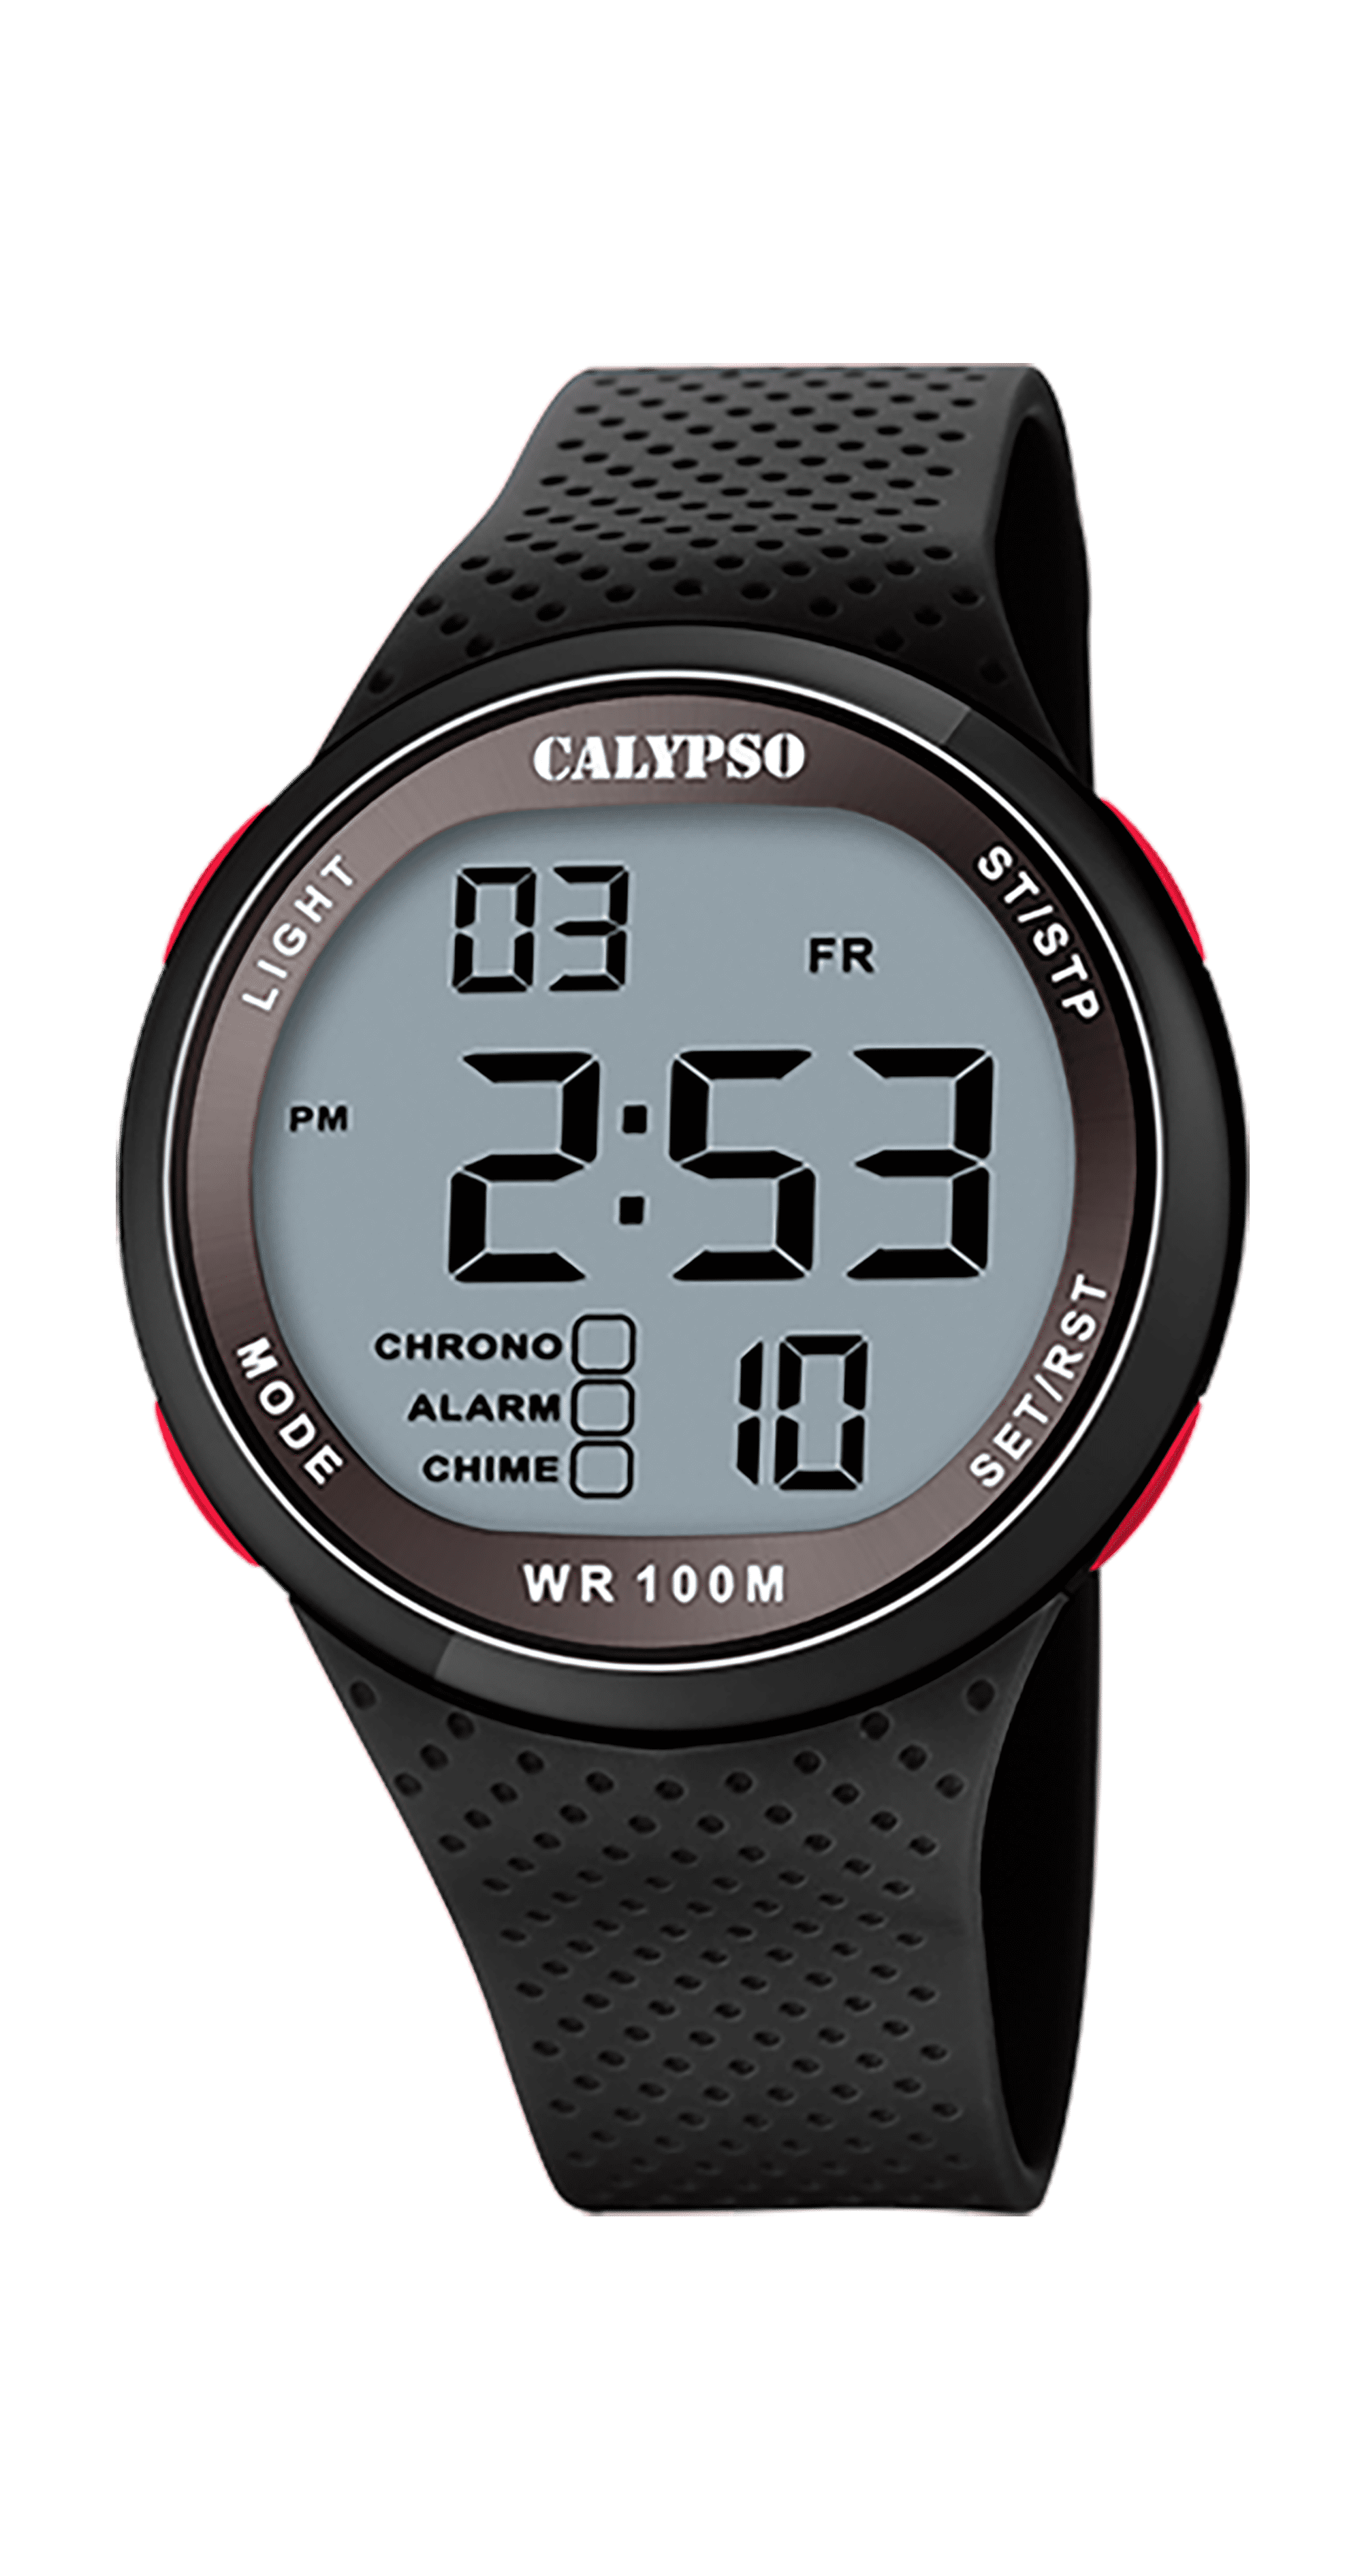 Silicone Backlight, Time, Date - Watch, 44mm Calendar Strap, Day Timer, K5785 Digital And Calypso Dual Mens Chronograph, Sports